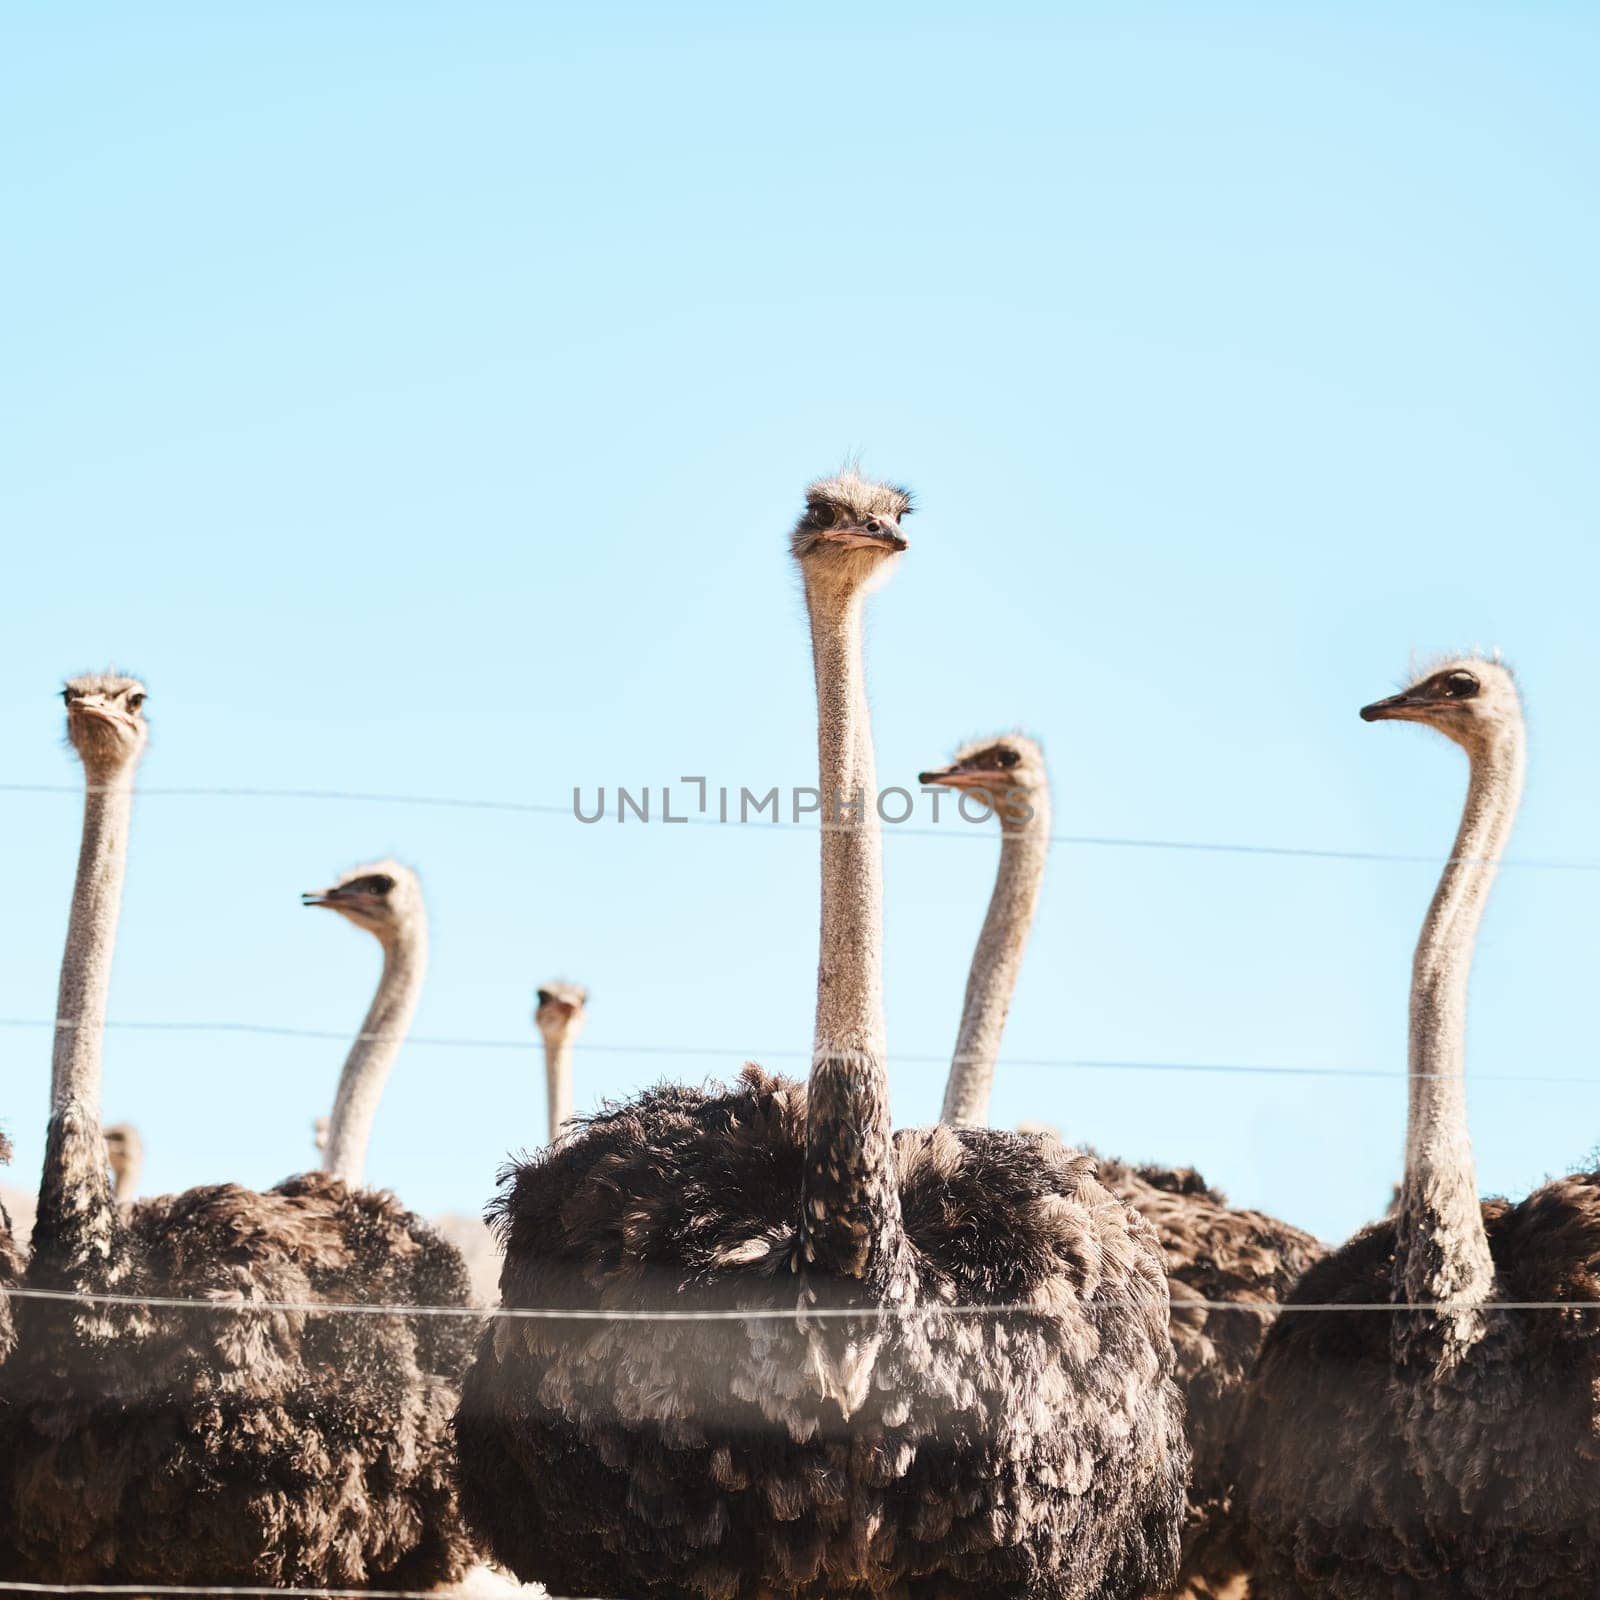 Our long necks make it all the better to see you. Still life shot of a flock of ostriches on a farm. by YuriArcurs